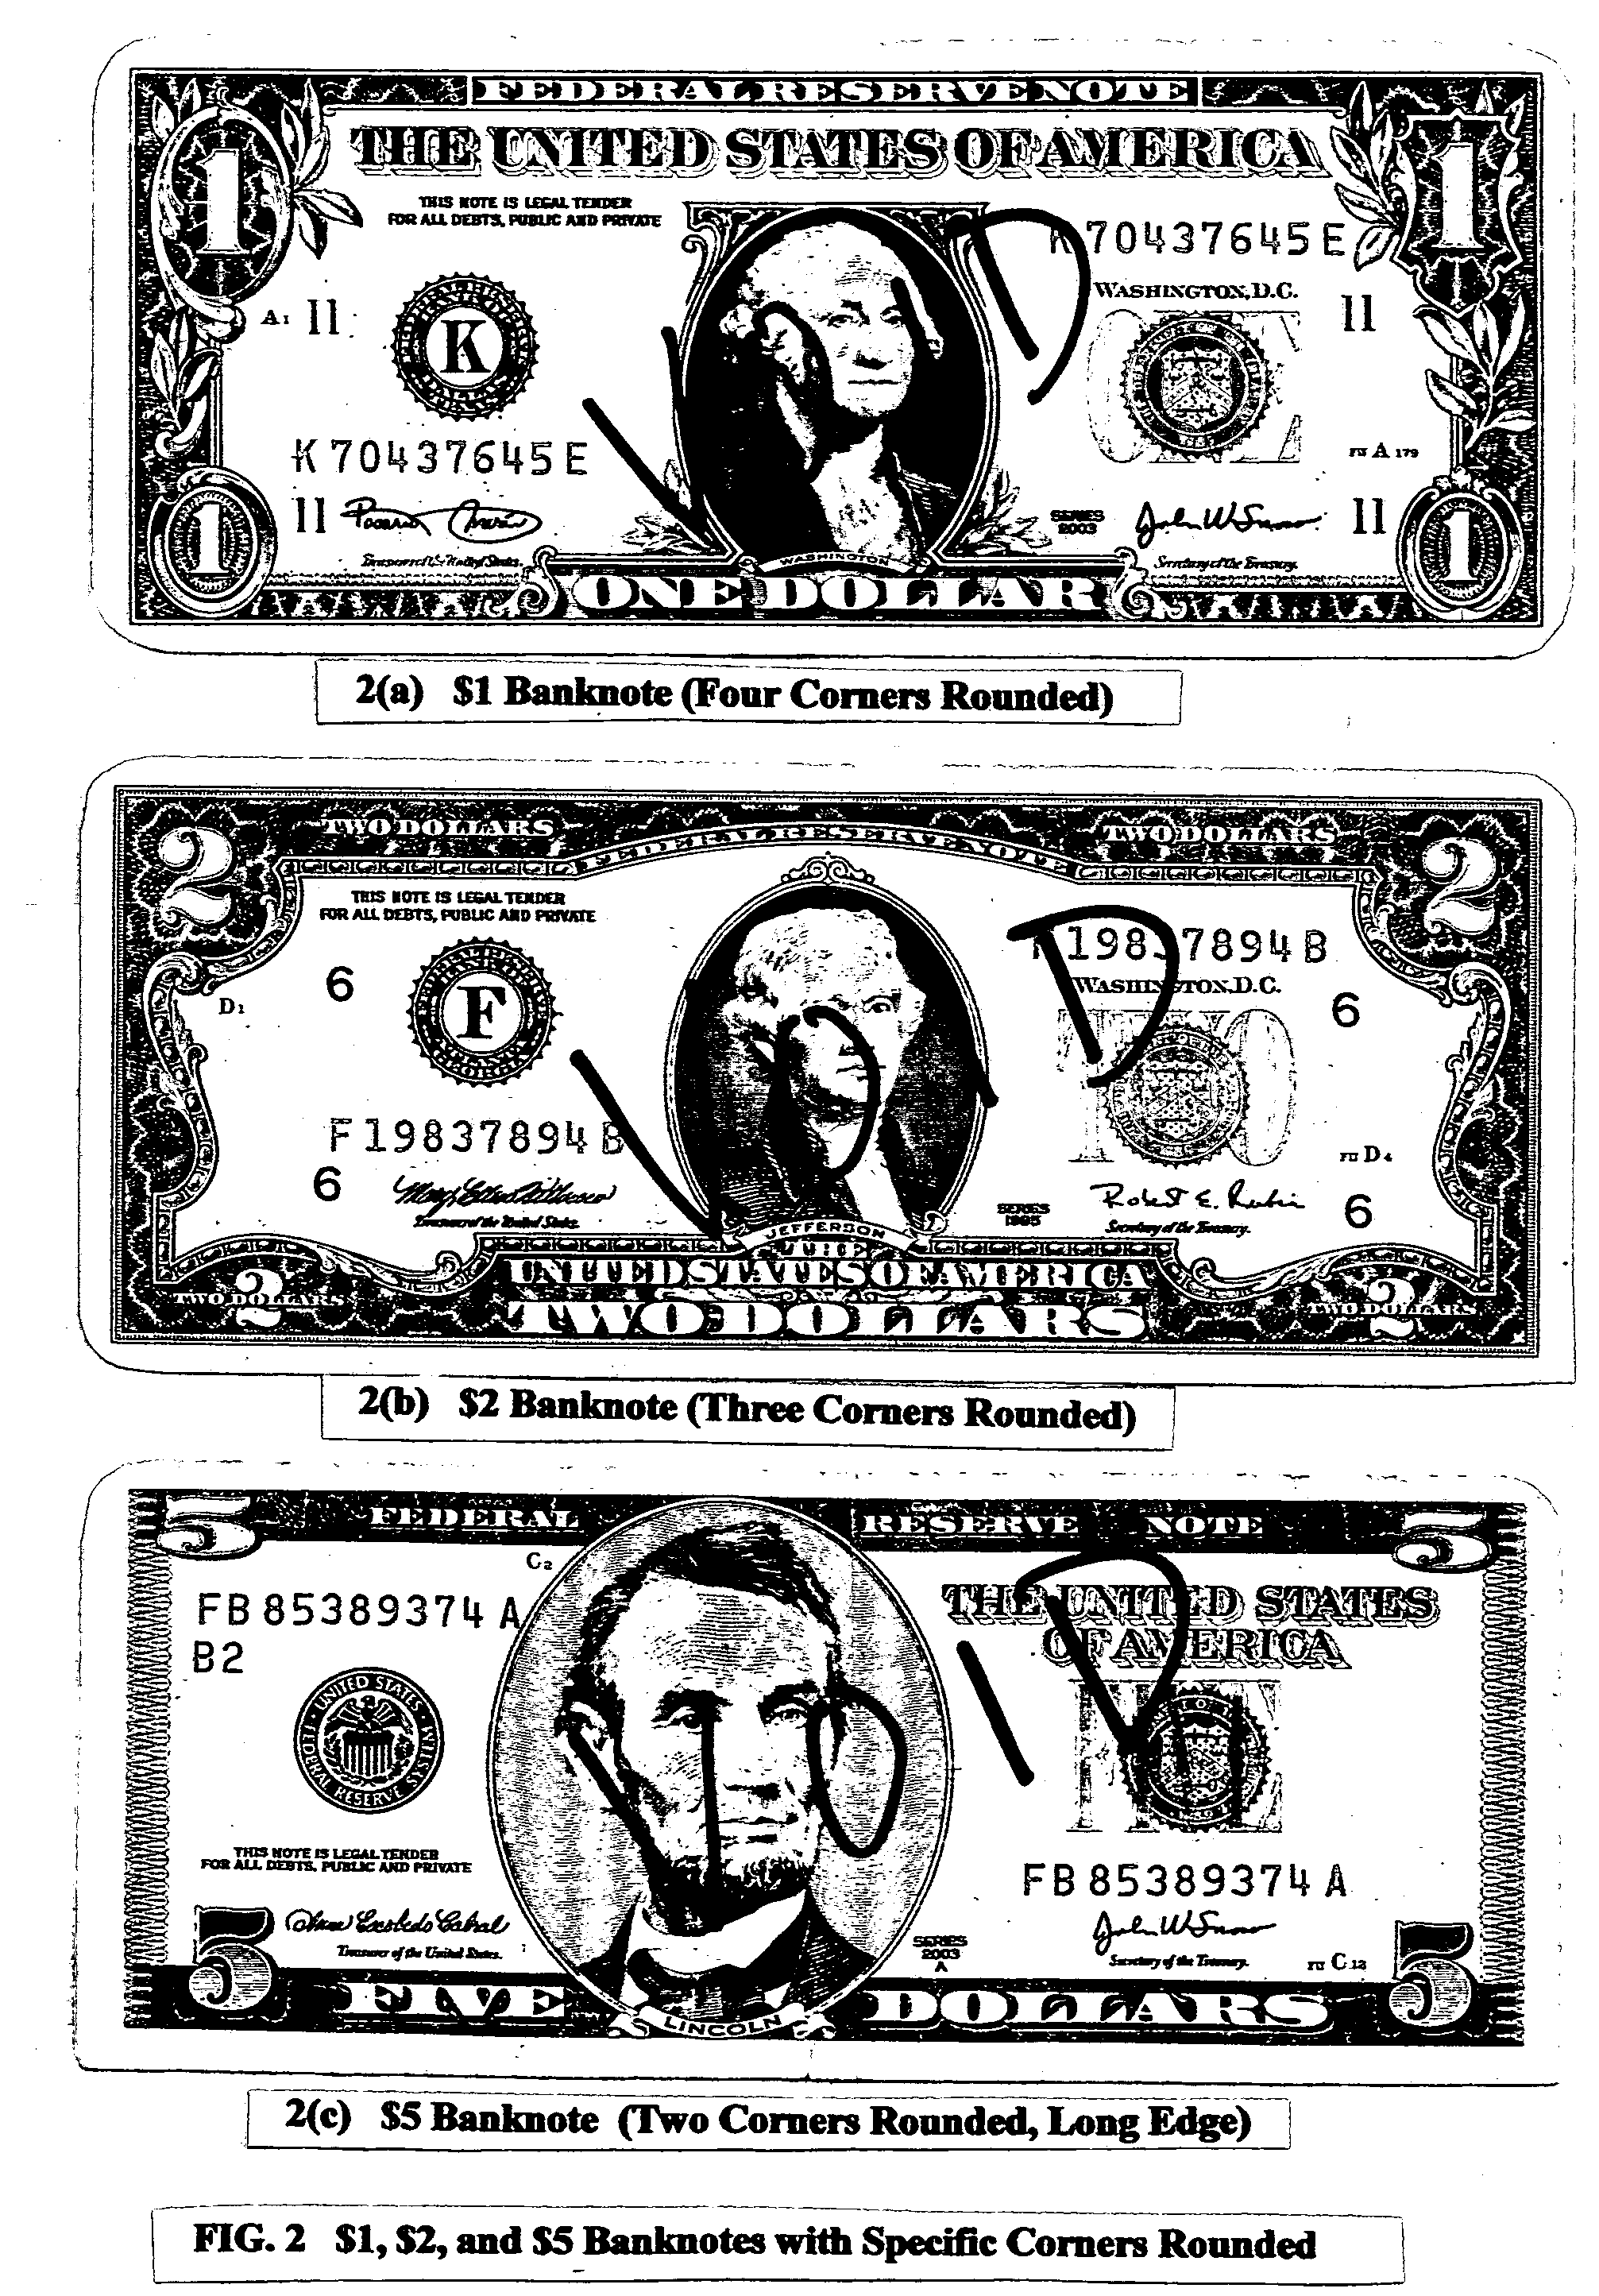 System and method for making U.S. banknotes readable by visually-impaired persons